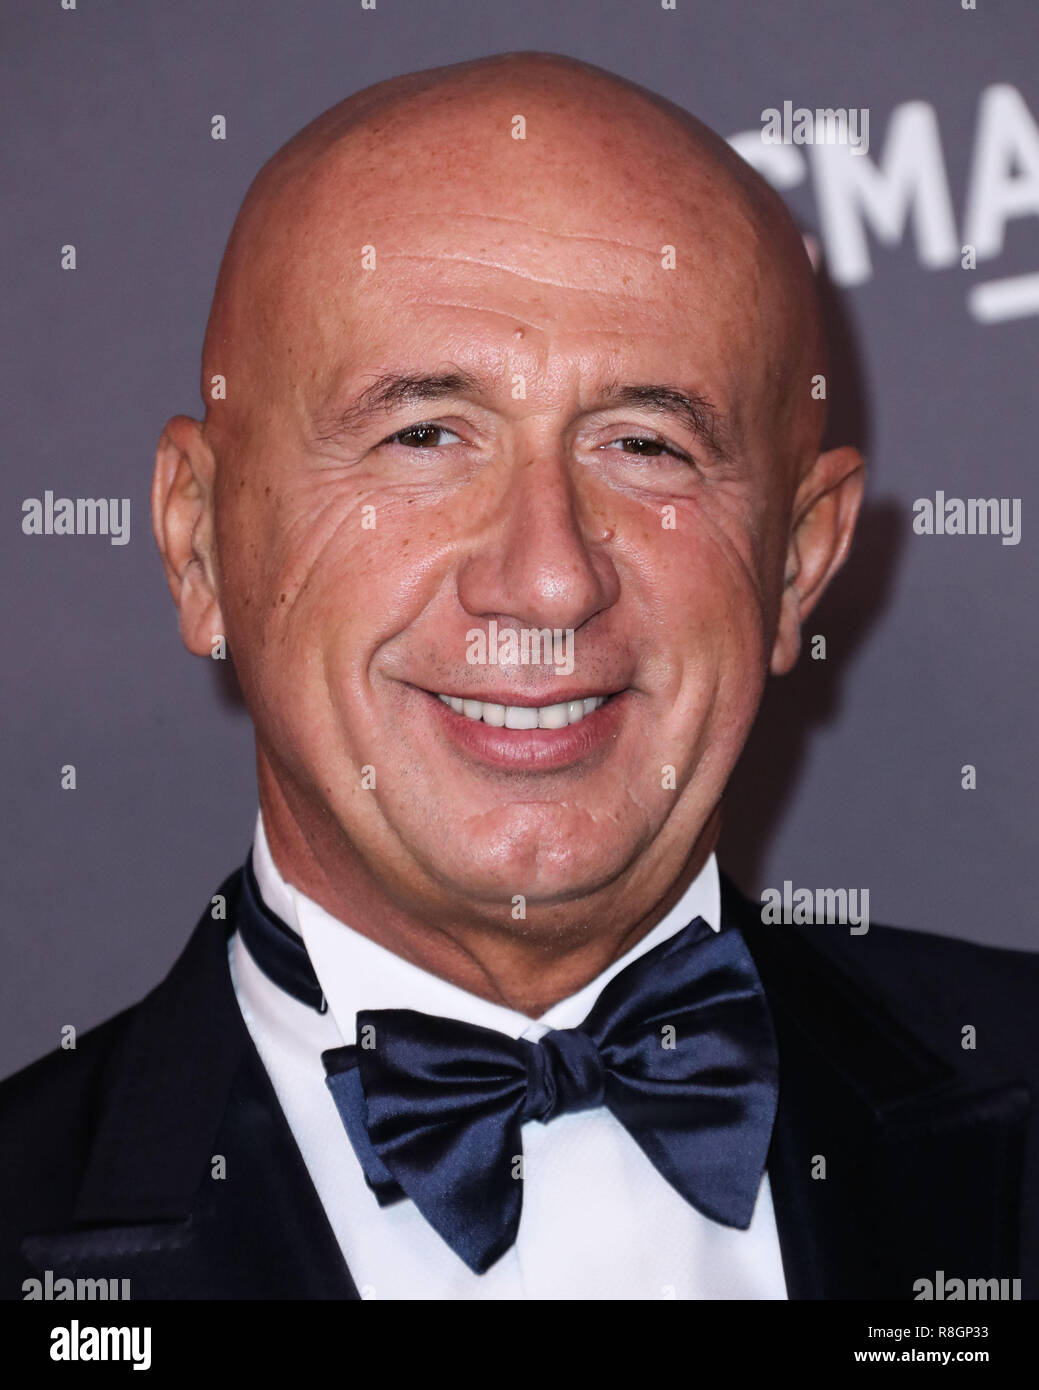 Marco Bizzarri High Resolution Stock Photography and Images - Alamy